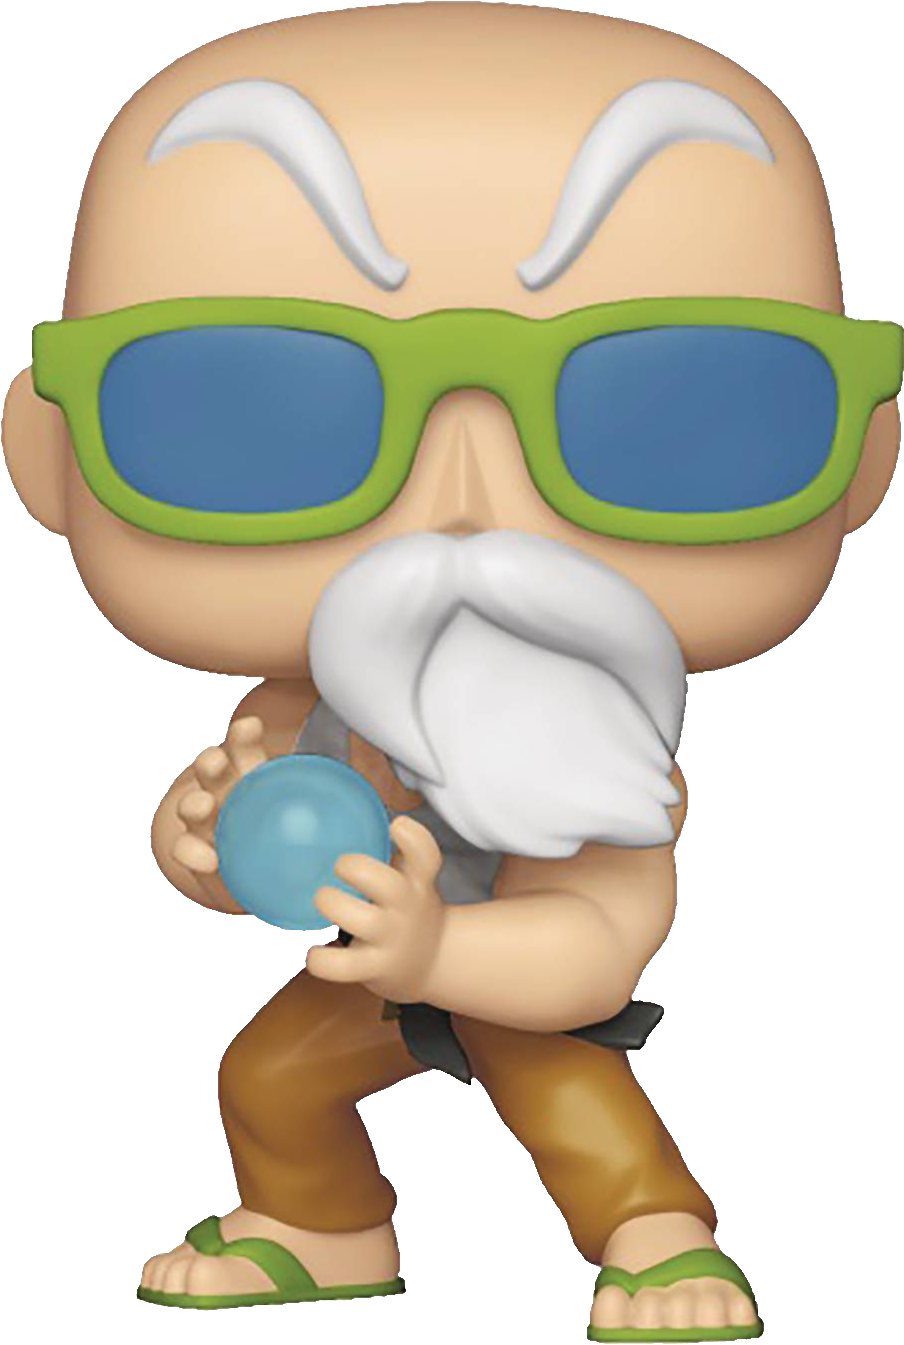 A Toy Figurine Of A Man With Green Glasses Holding A Blue Ball